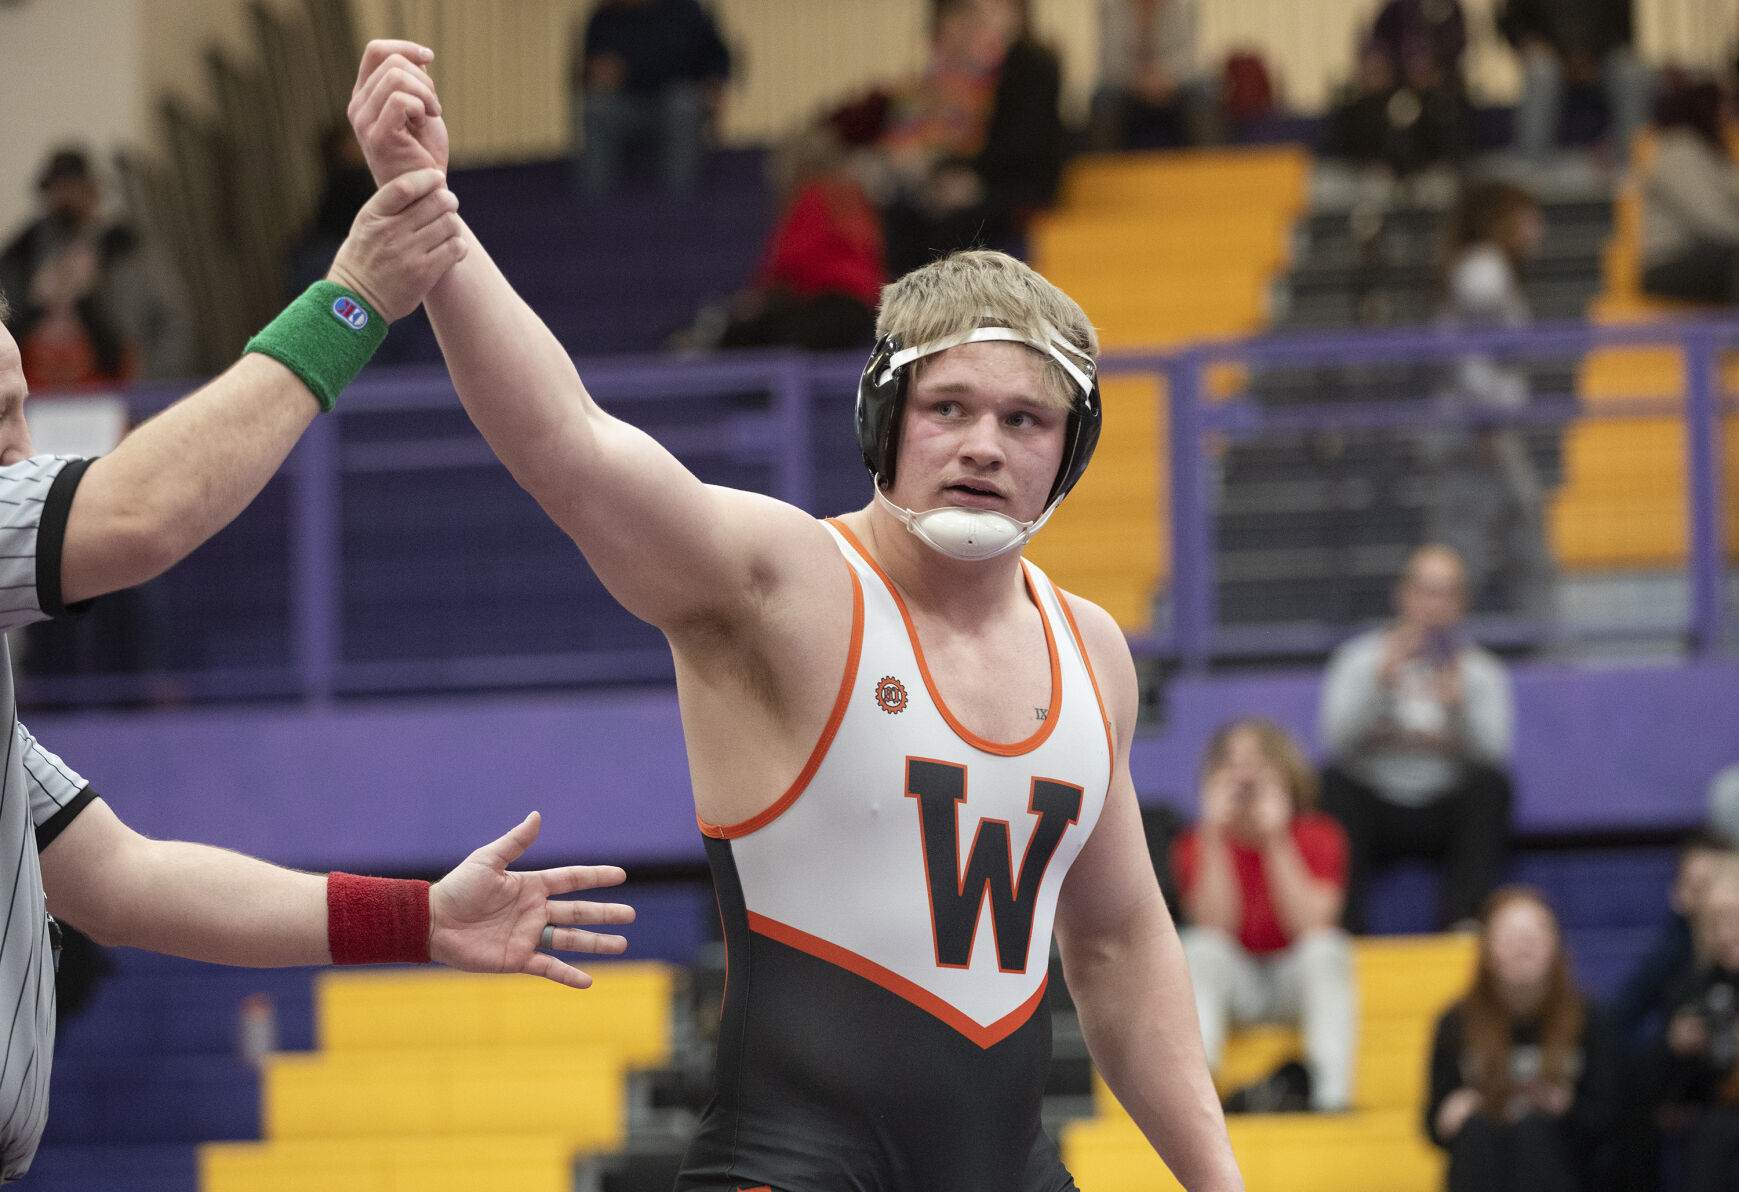 Sommers takes aim at becoming Waterloos first state champion after recovery from broken picture